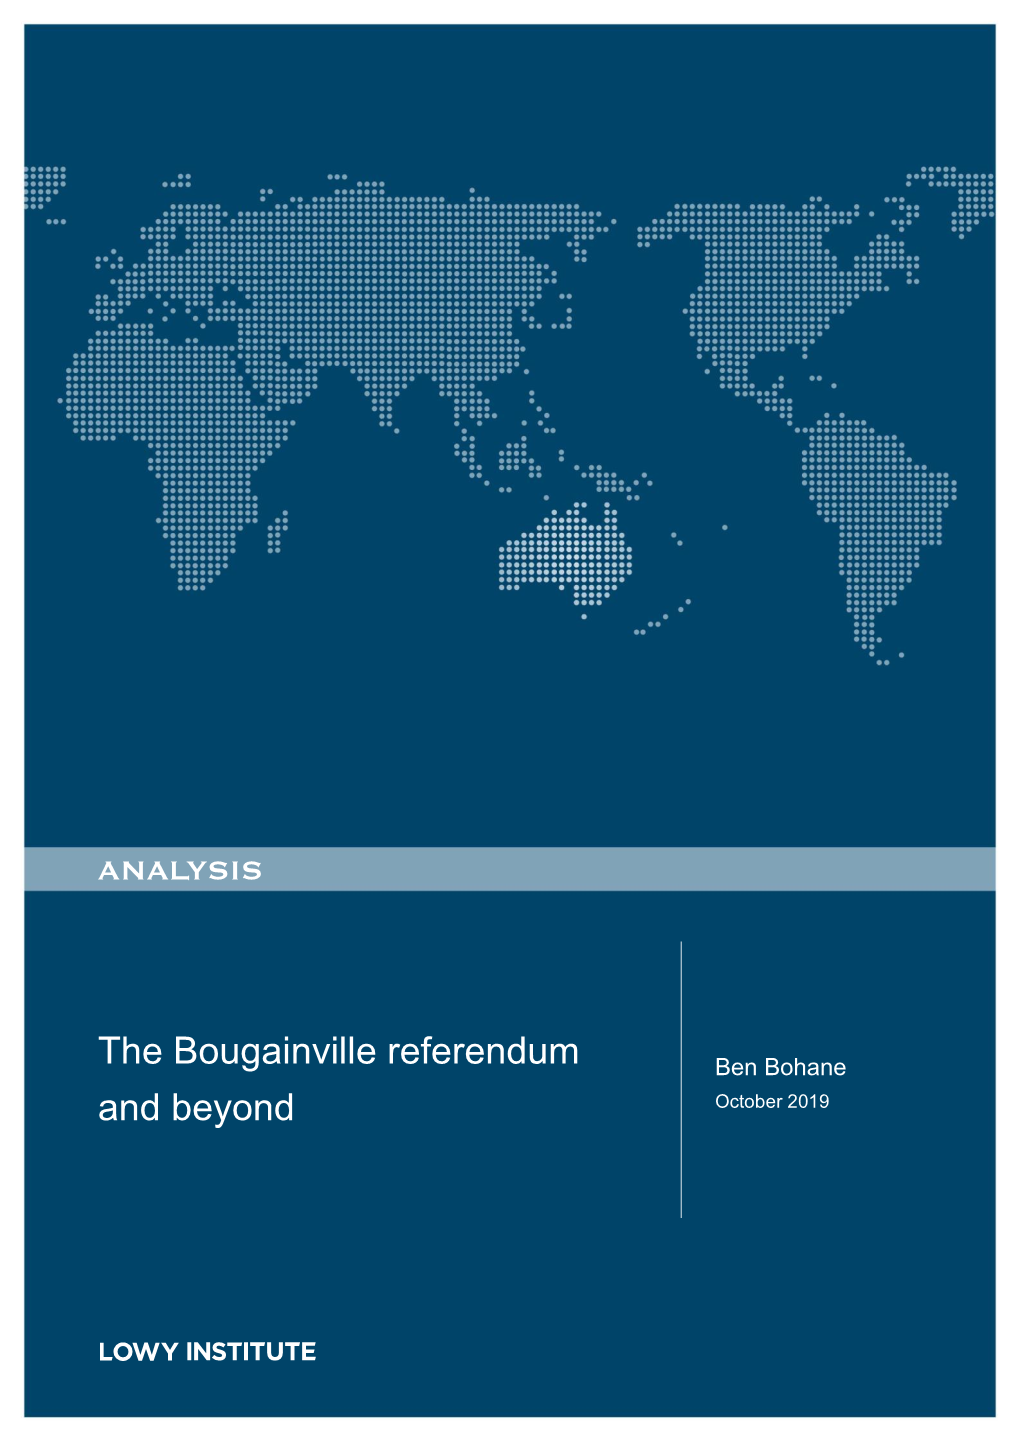 The Bougainville Referendum and Beyond